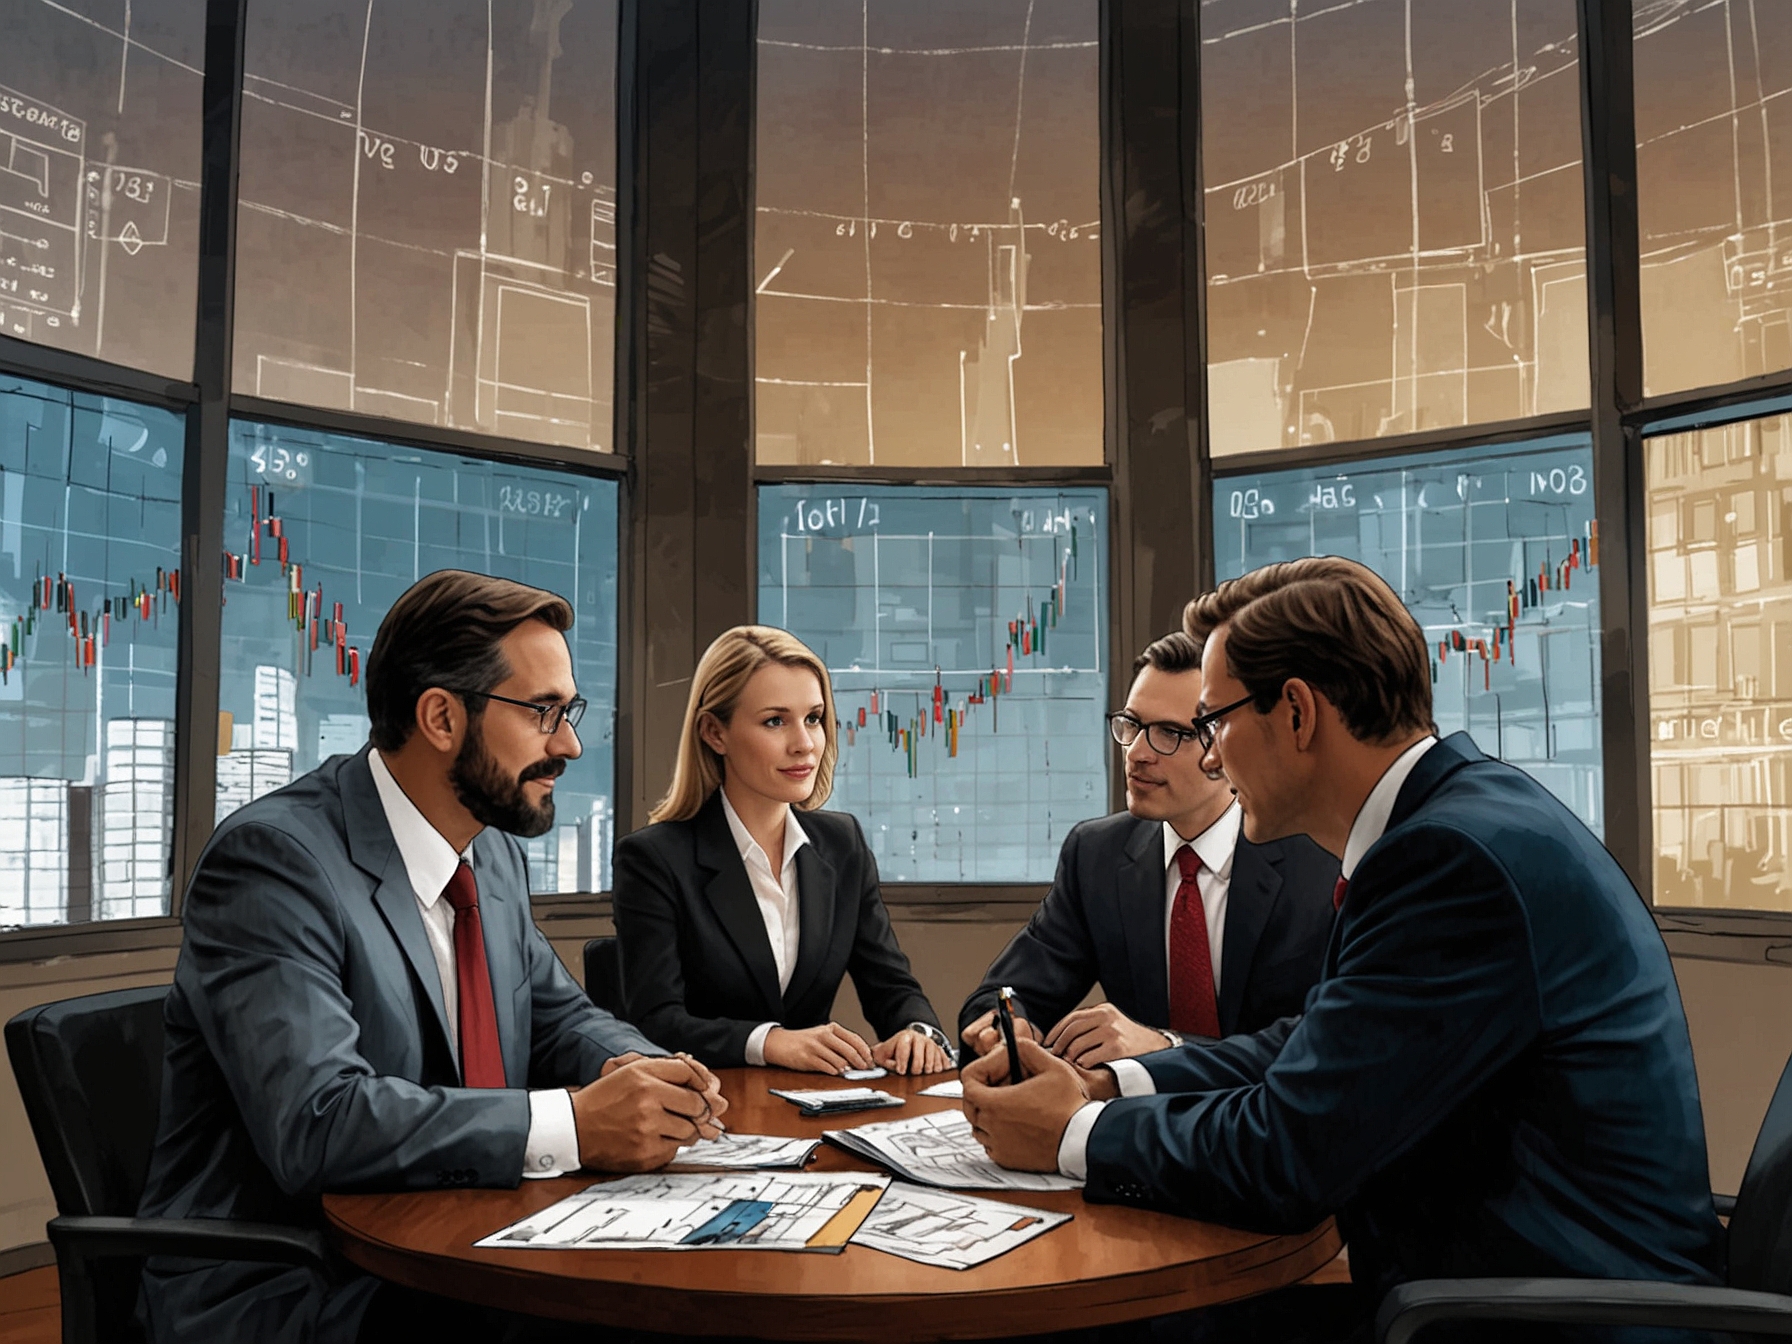 An image of financial analysts discussing stock ratings with digital charts in the background, symbolizing the diverse evaluations Pennant Group has received over the past three months.